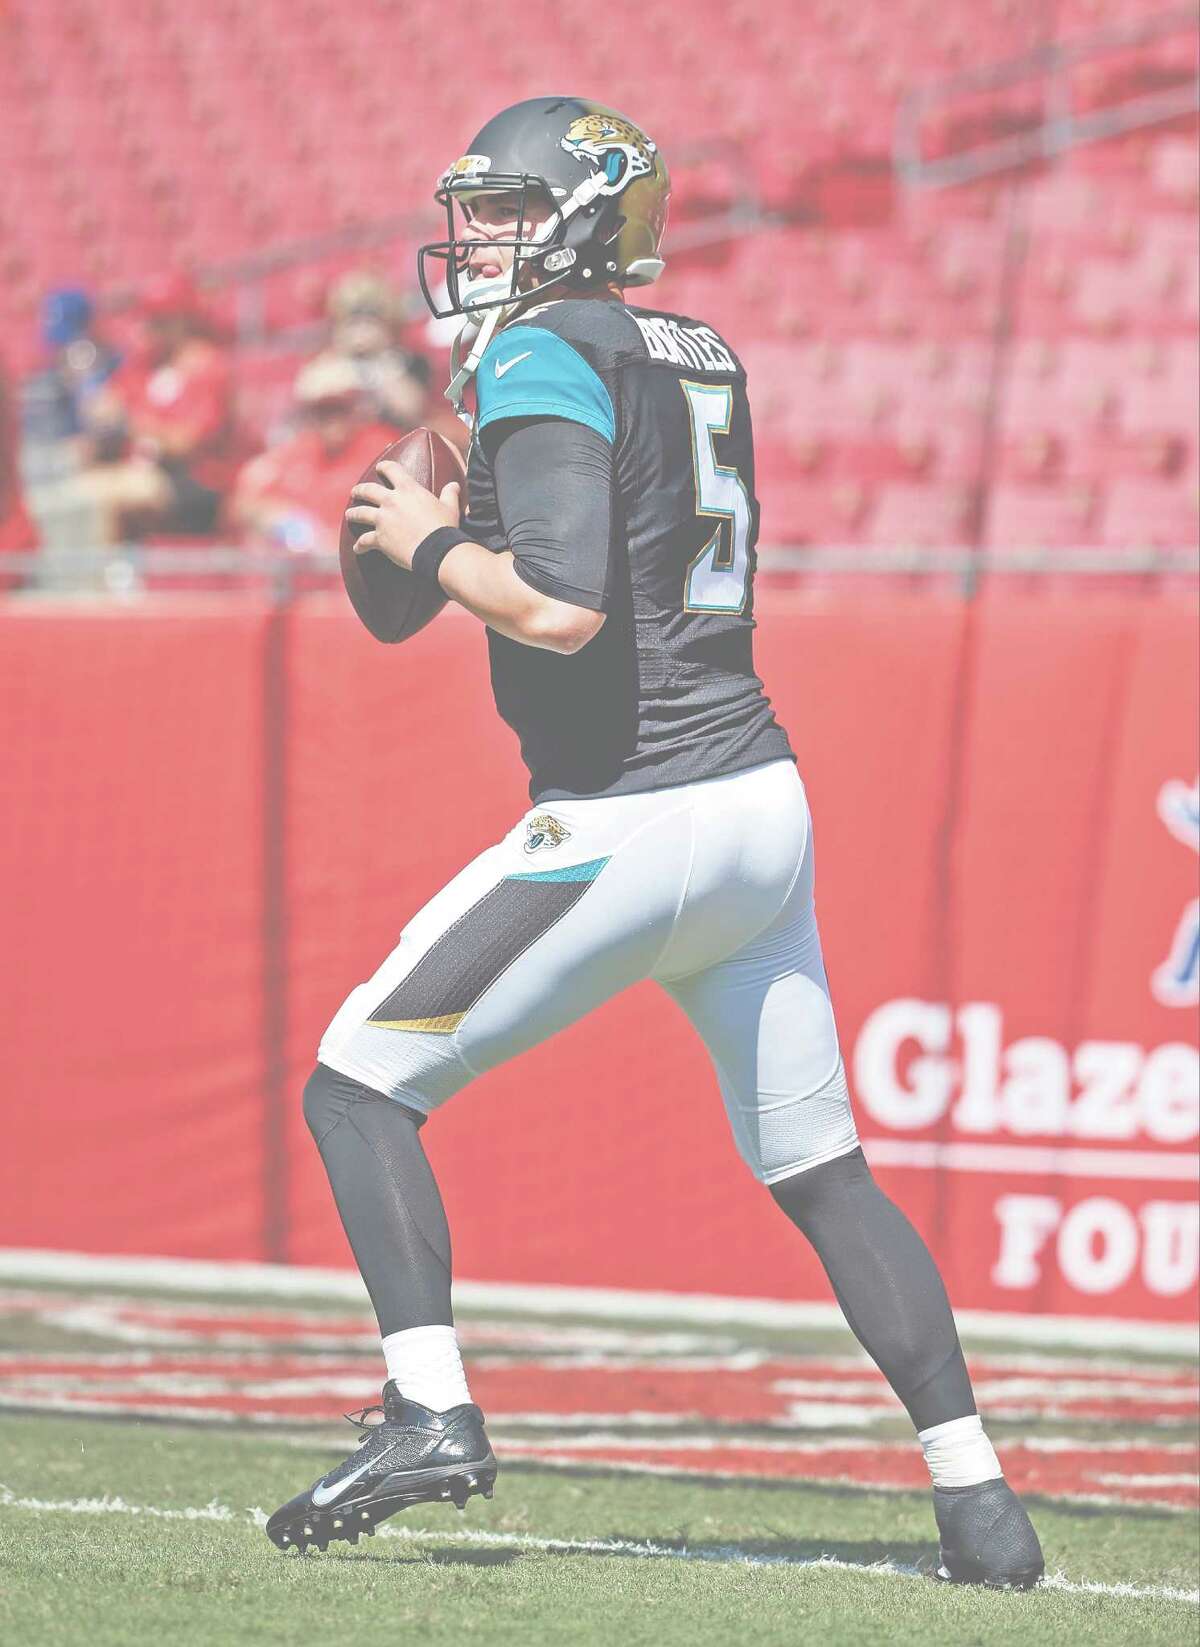 Jacksonville Jaguars quarterback Blake Bortles (5) warms up before the start of an NFL football game against theTampa Bay Buccaneers Sunday, Oct. 11, 2015, in Tampa, Fla. (AP Photo/Brian Blanco)